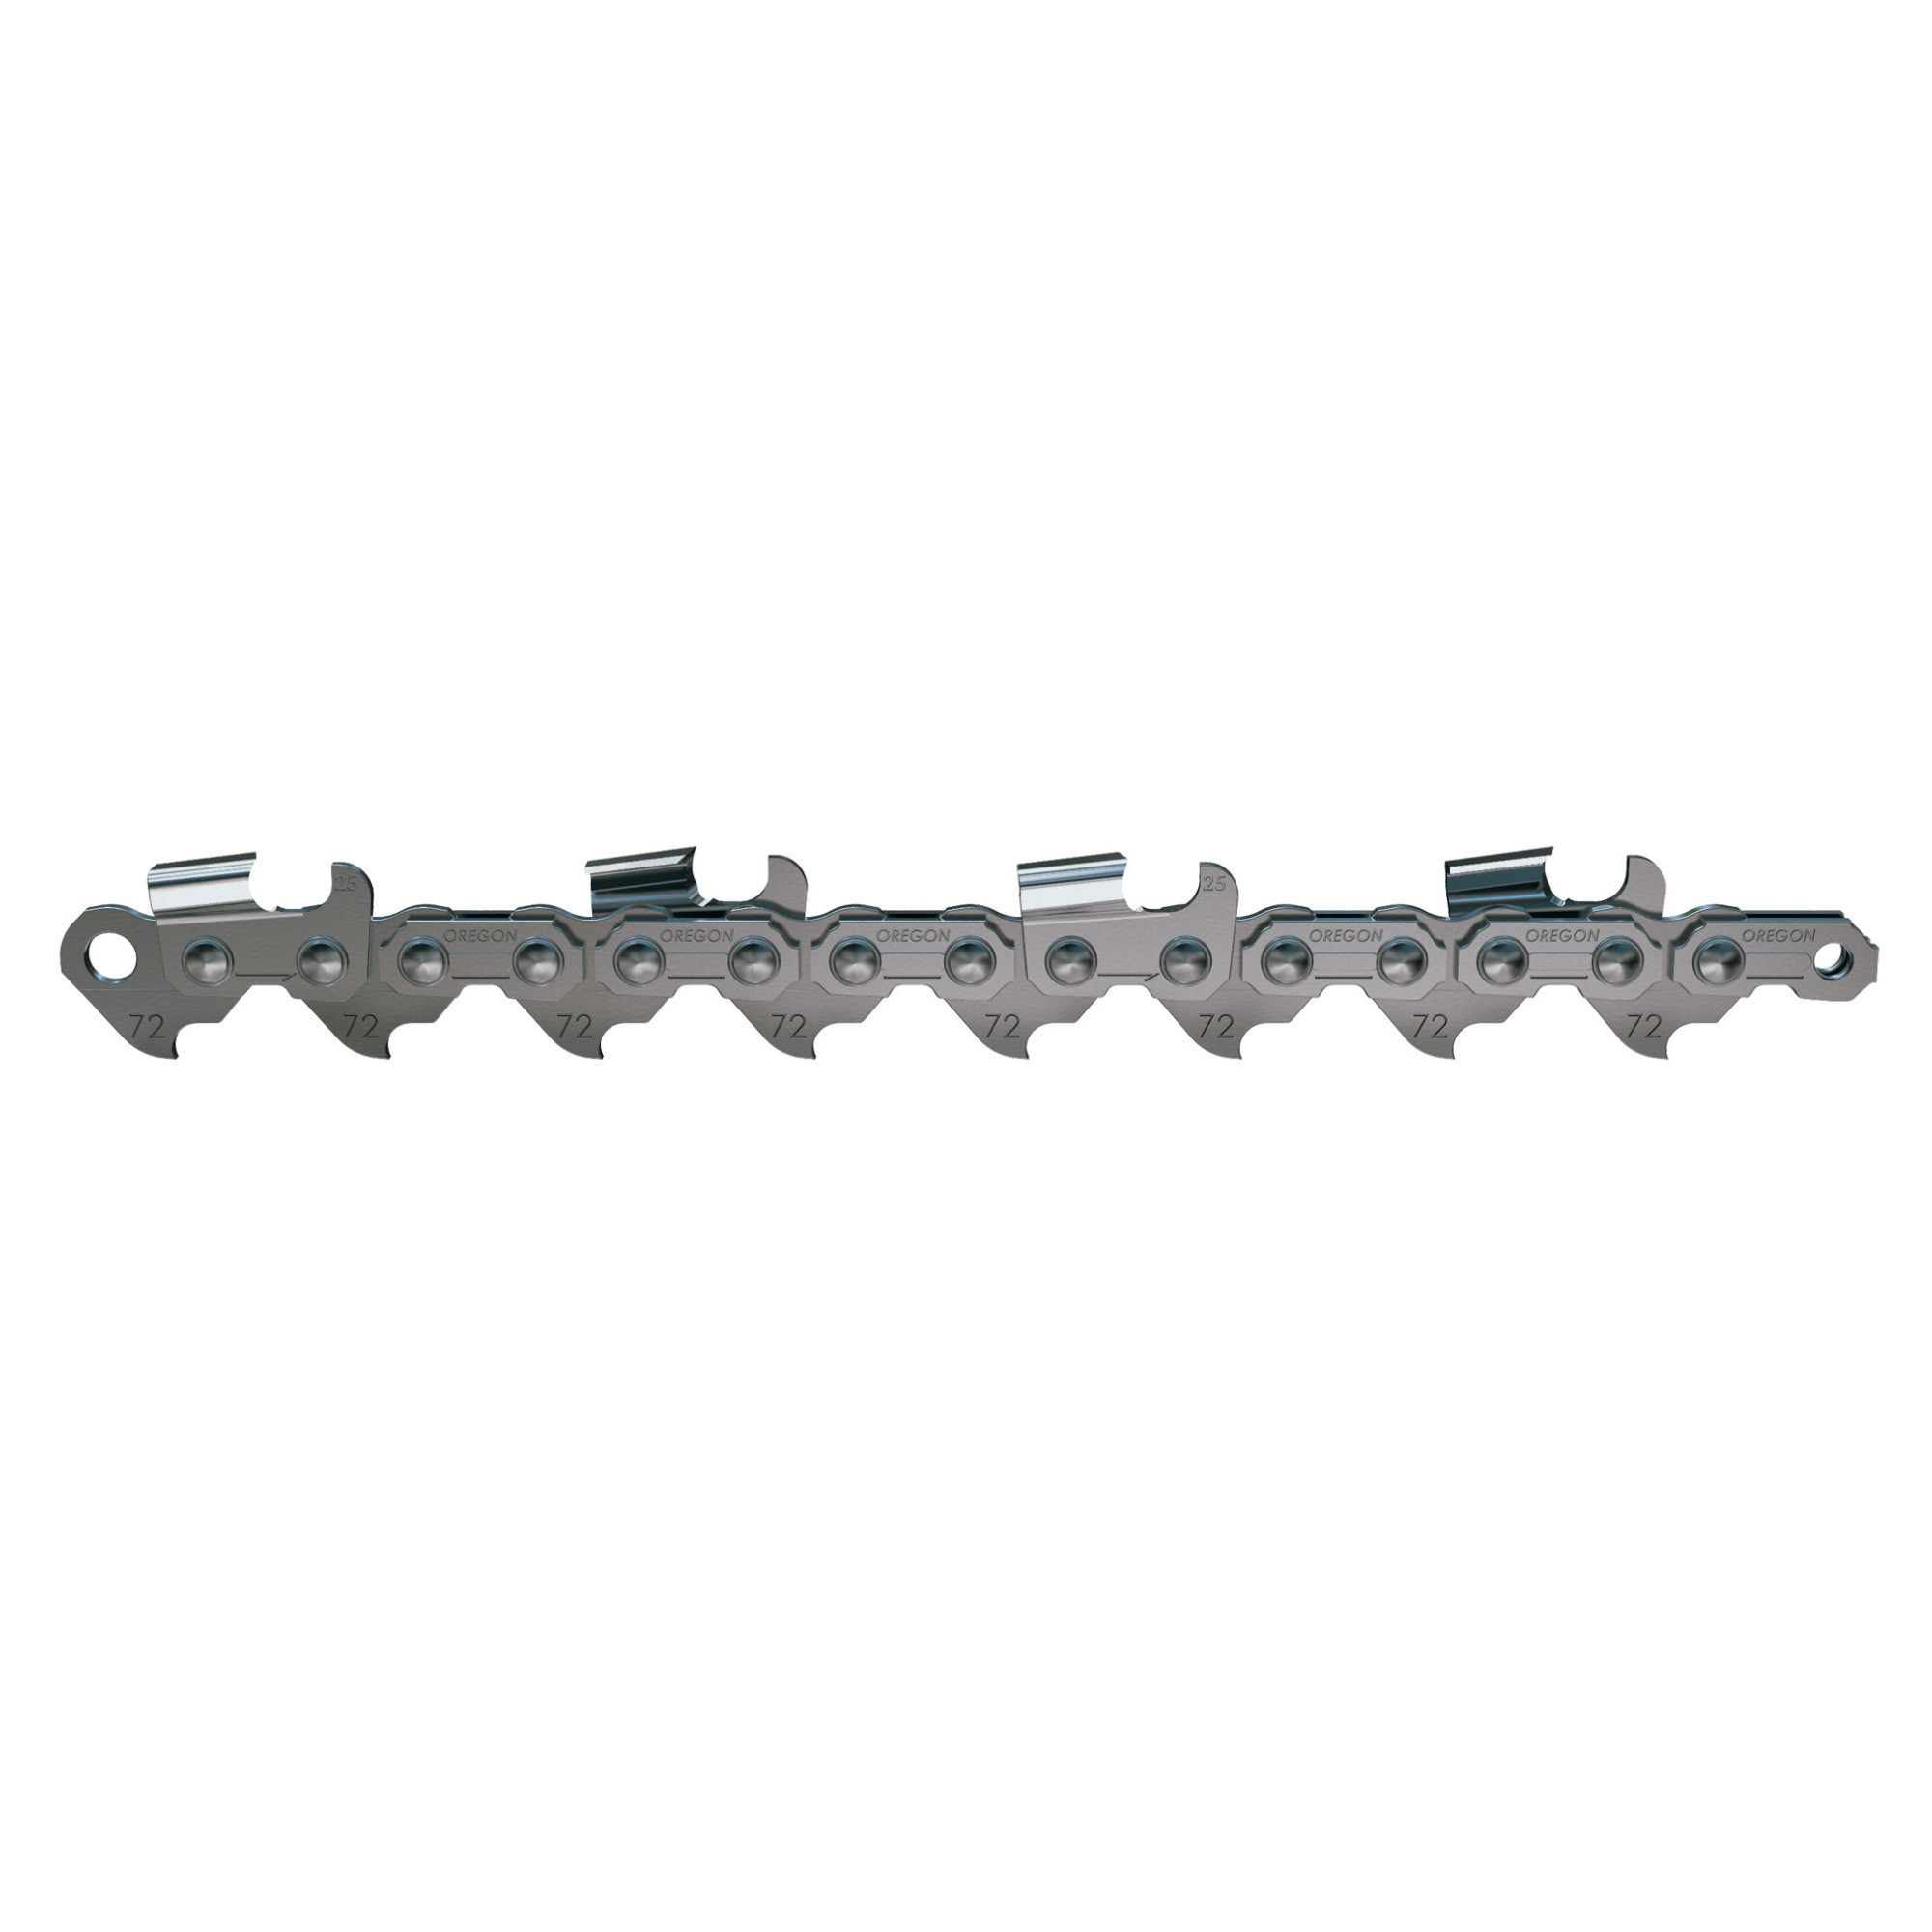 Oregon RipCut Chainsaw Chain, Bar Length 18 in, Chain Pitch 3/8 in, Chain Gauge 0.05 in, Model 72RD066G